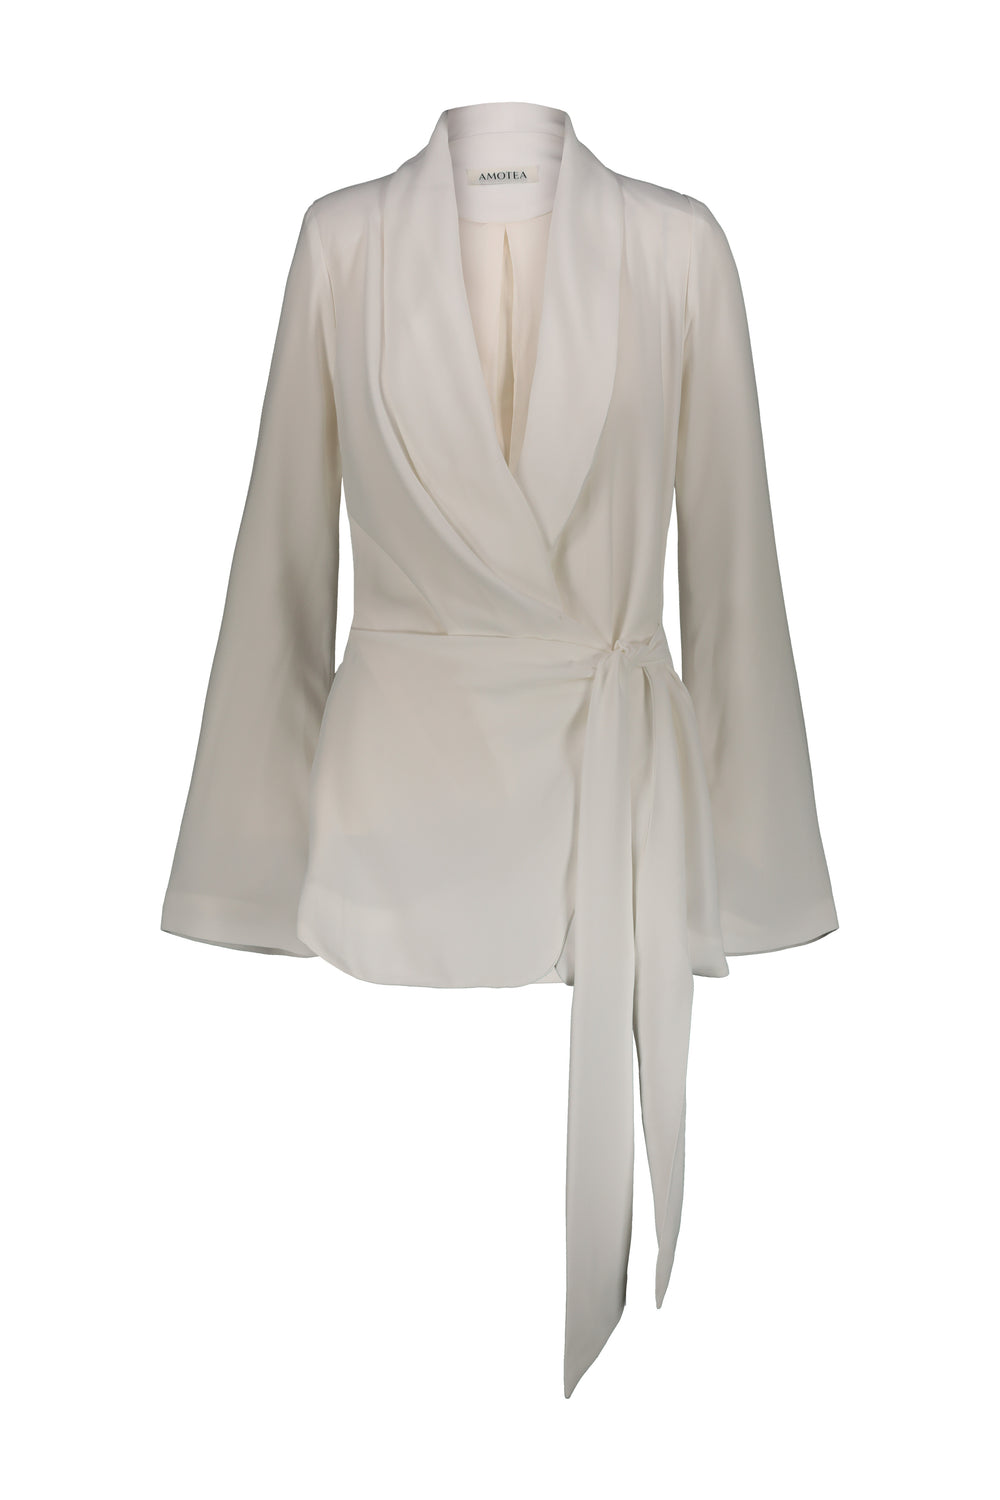 FIONA IN IVORY CREPE DE CHINE